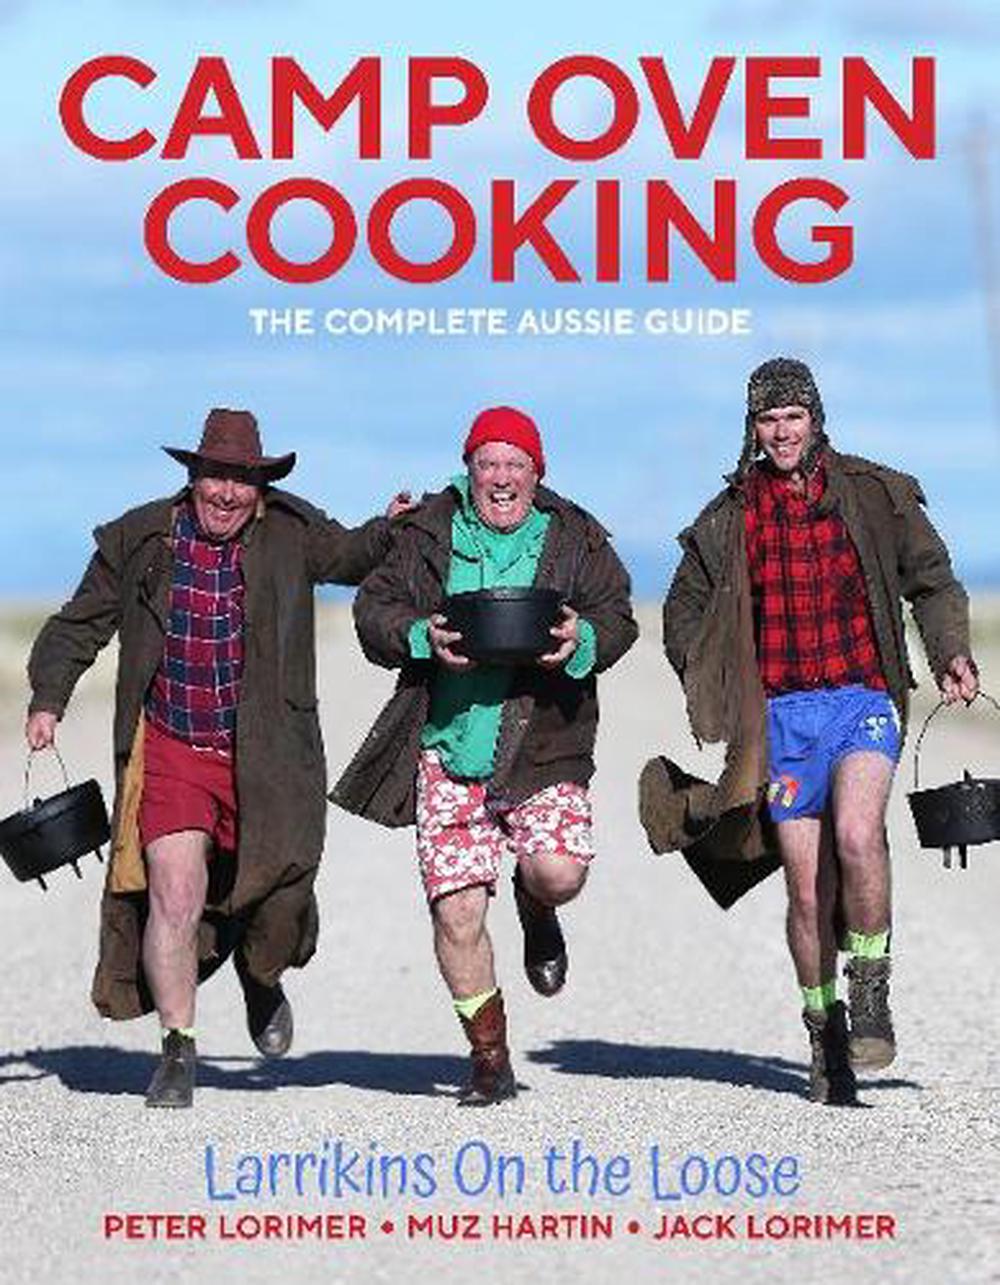 Camp Oven Cooking gift ideas for Christmas | The Camp Oven Cook